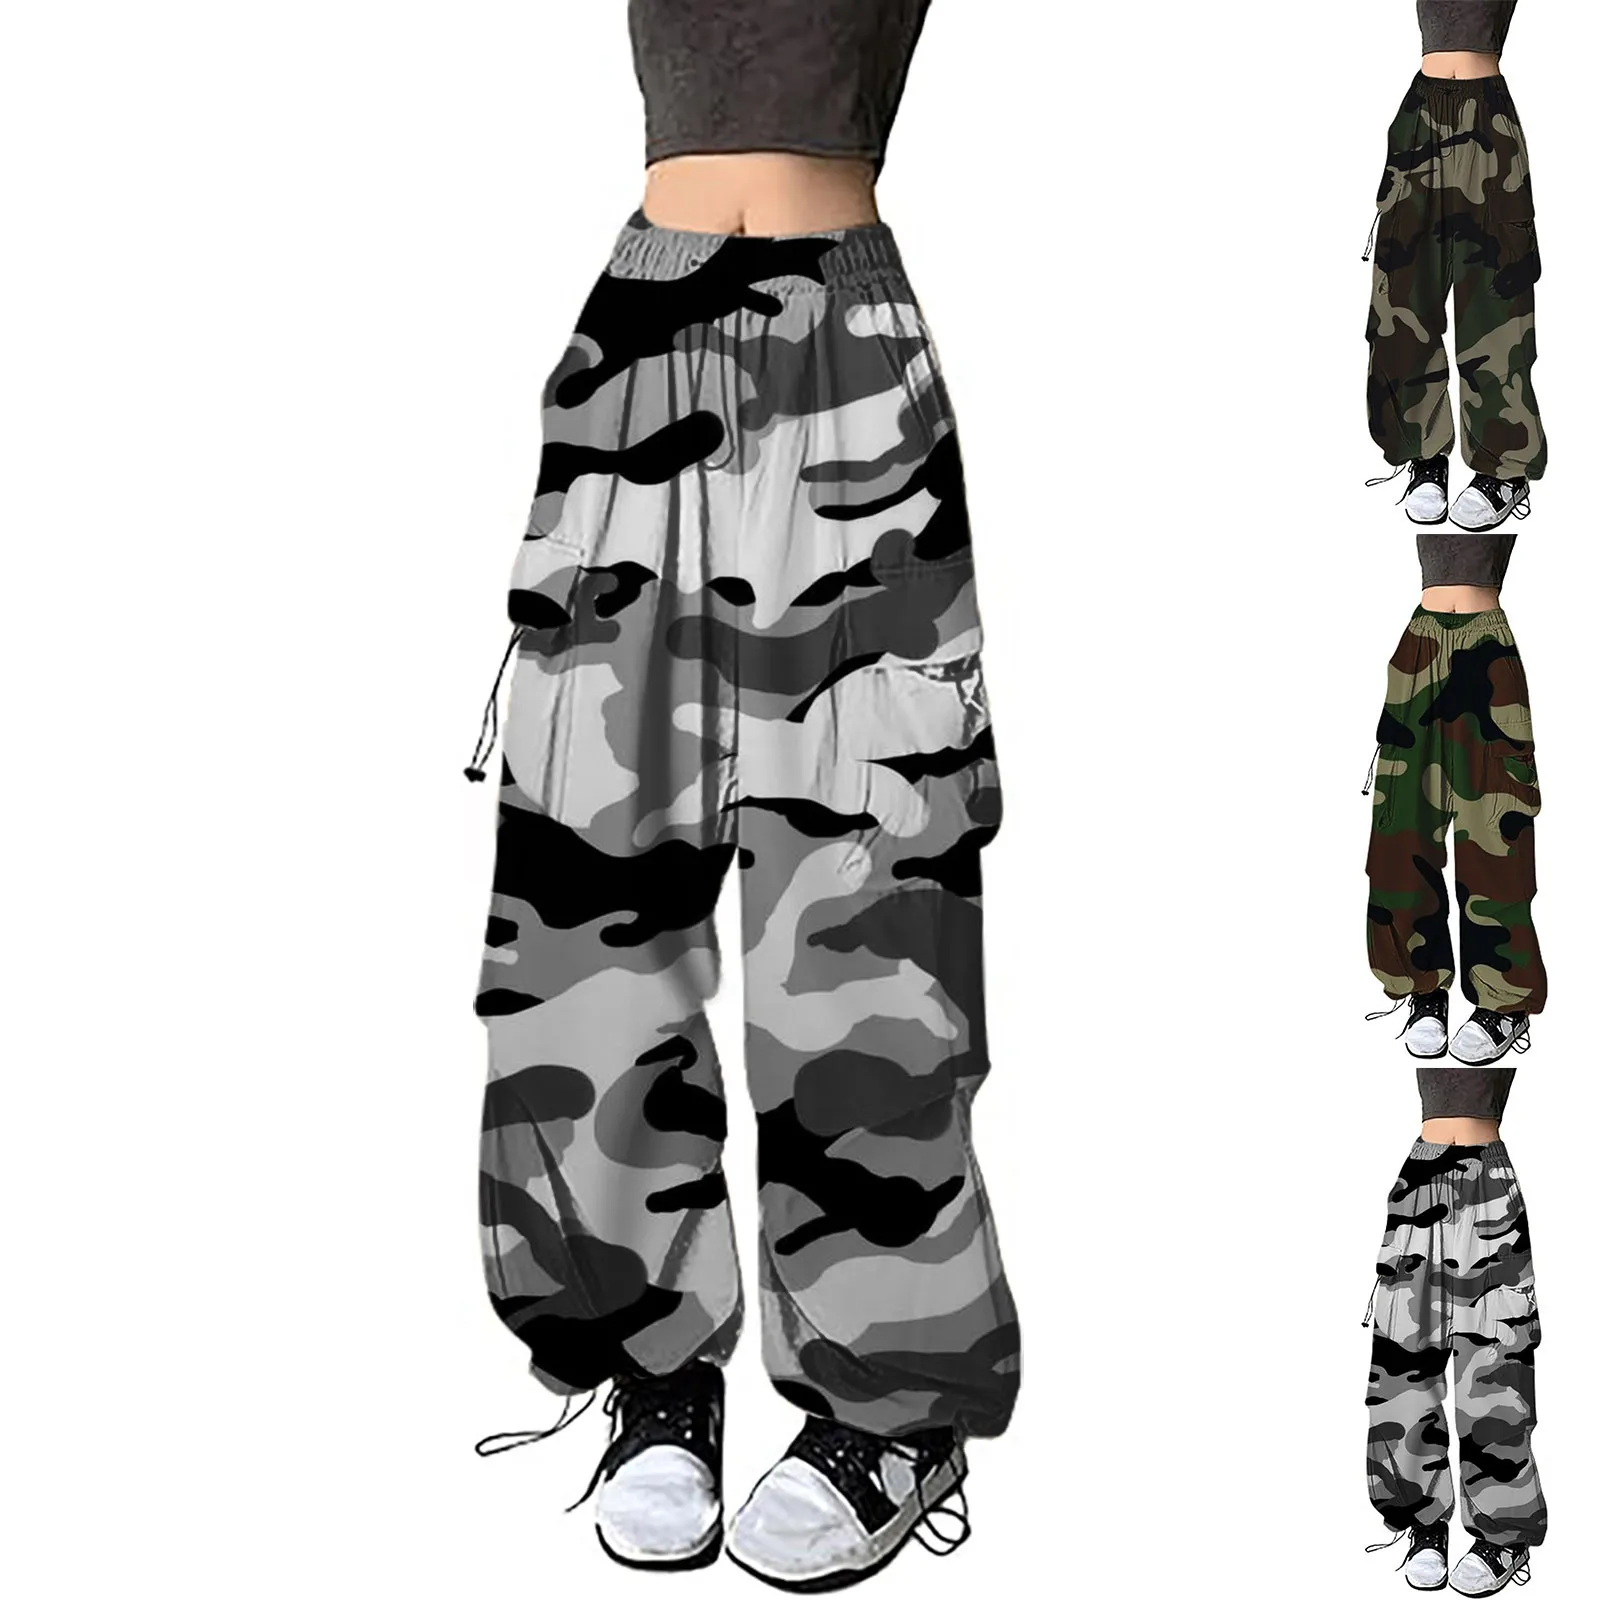 Stretchy Waist Womens Baggy Cargo Pants Y2K Streetwear Hip Hop Joggers Sweatpants Casual Loose Camouflage Wide Leg Trousers